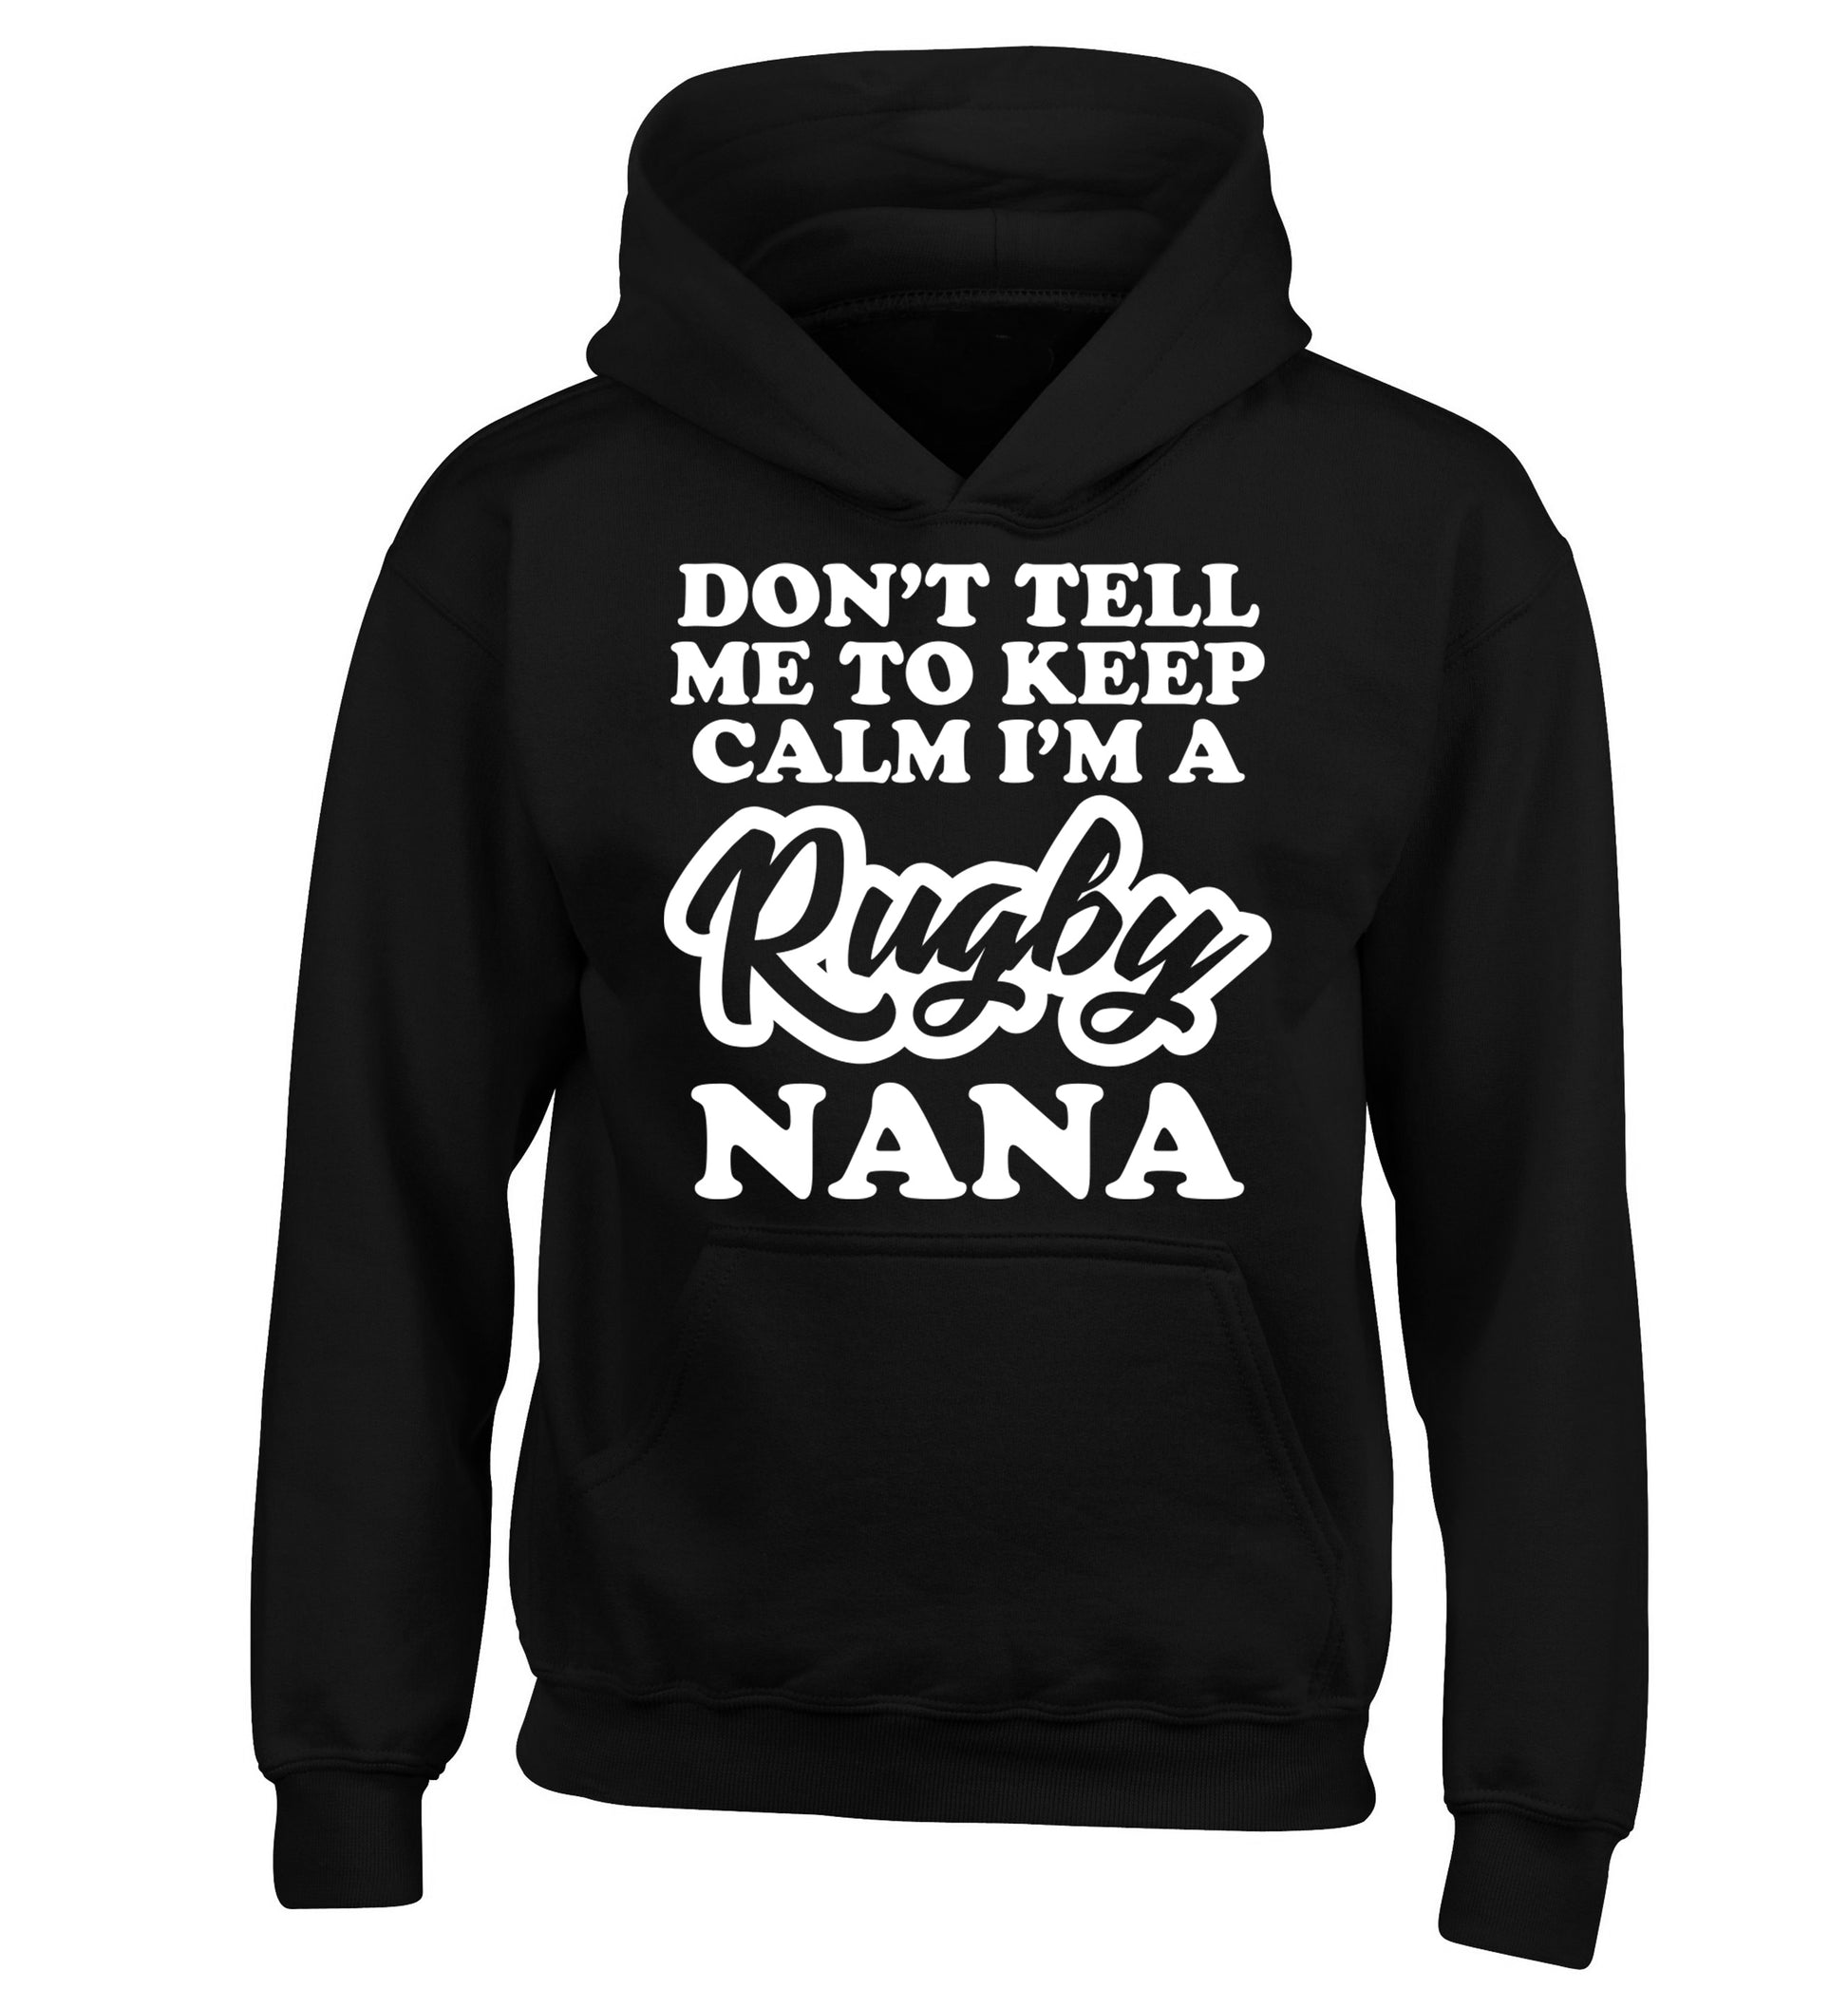 Don't tell me to keep calm I'm a rugby nana children's black hoodie 12-13 Years